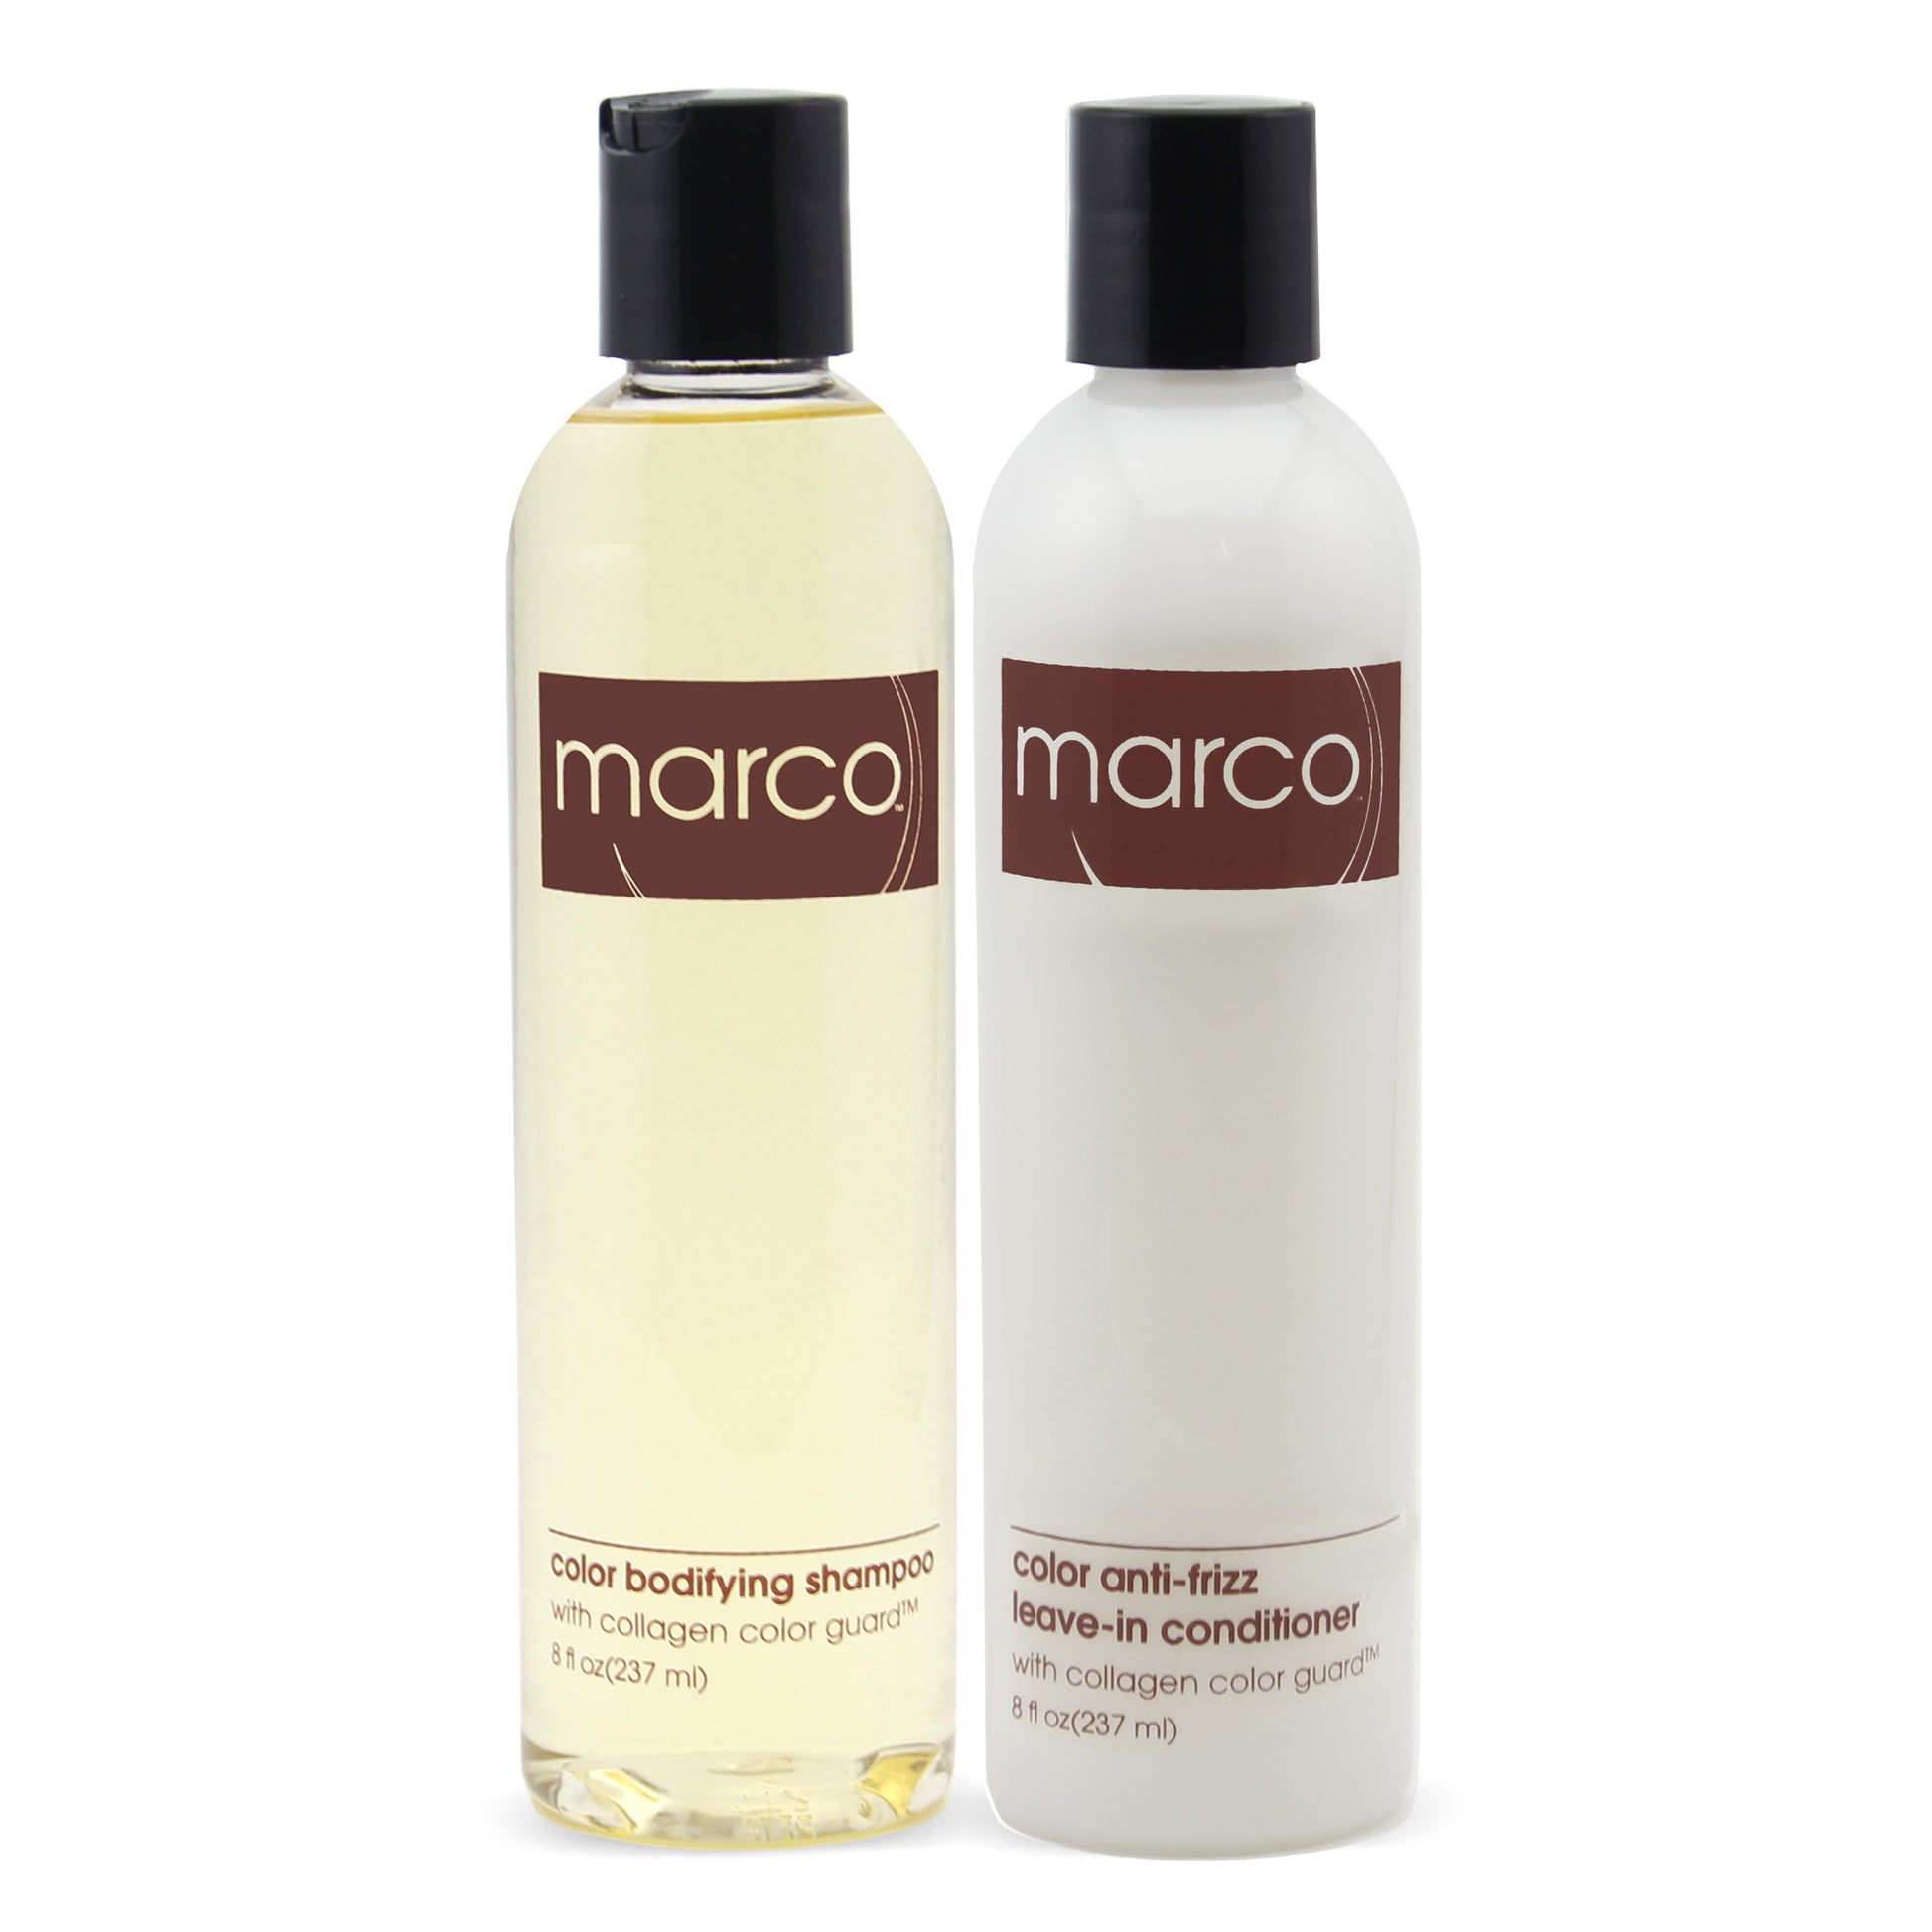 Two bottles, Marco color bodifying shampoo and anti-frizz leave-in conditioner with collagen color guard